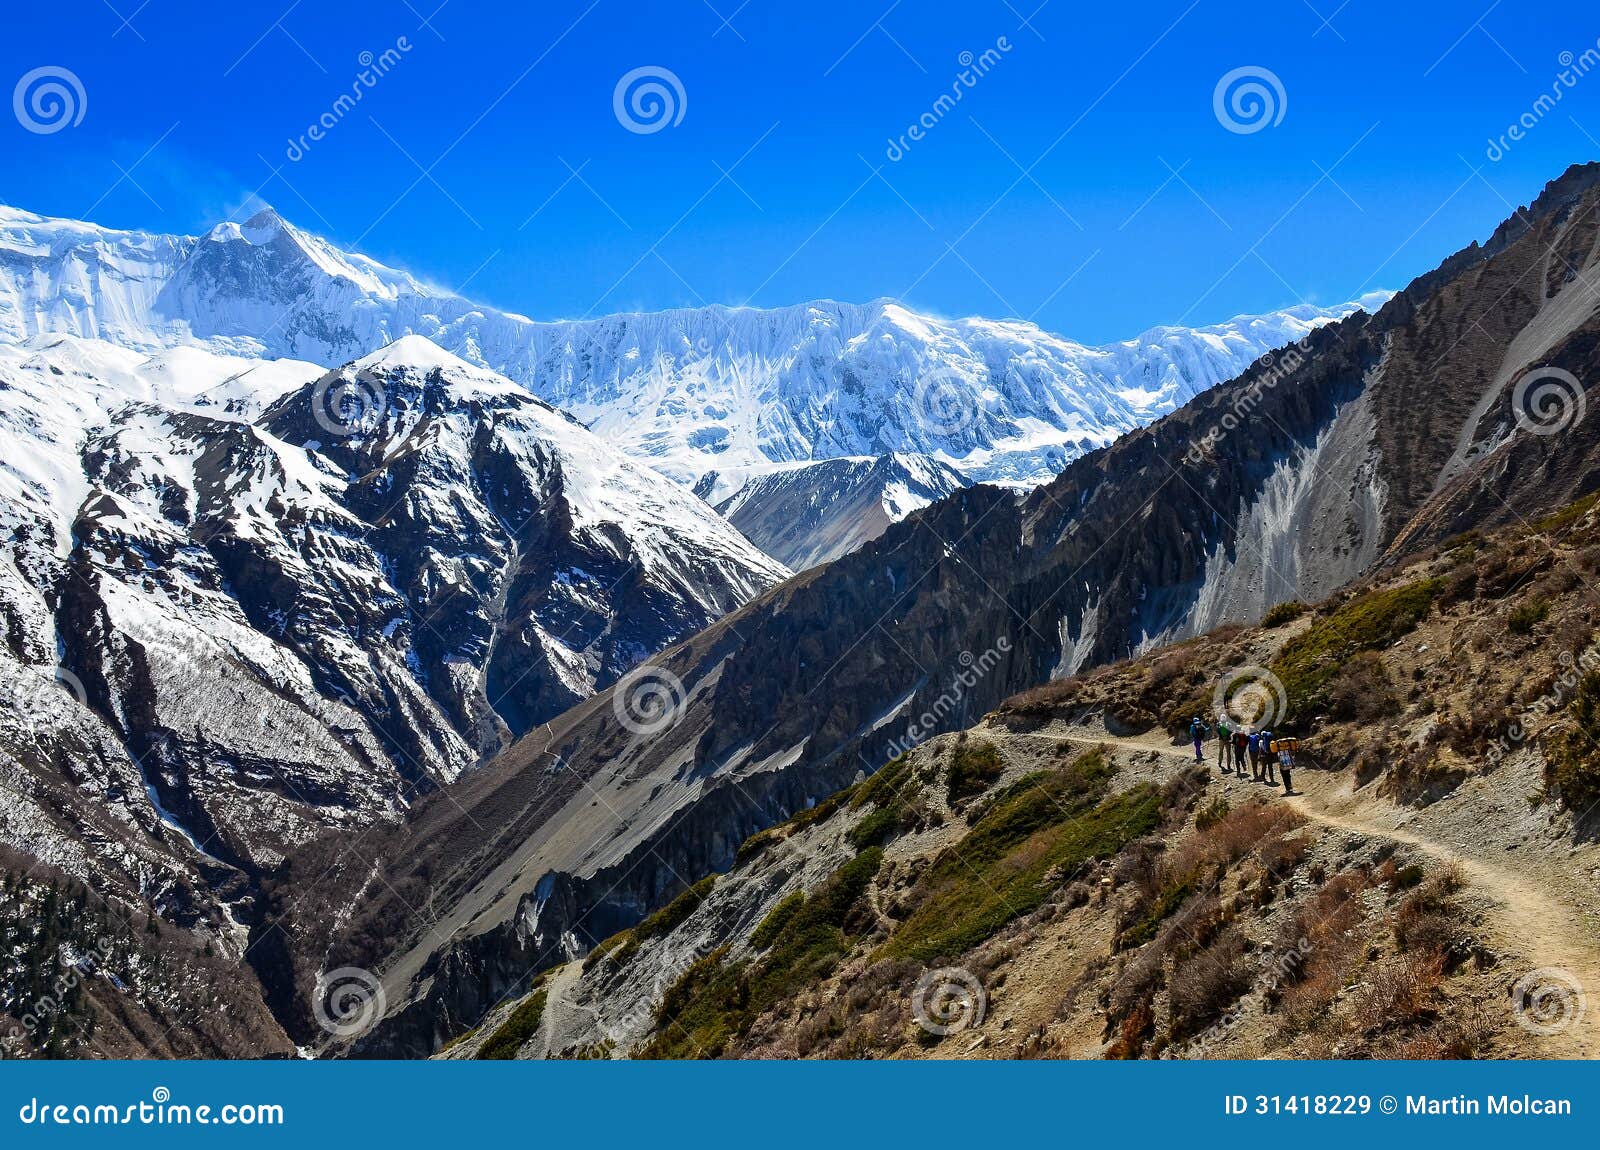 group of mountain trekkers backpacking in himalayas landscape